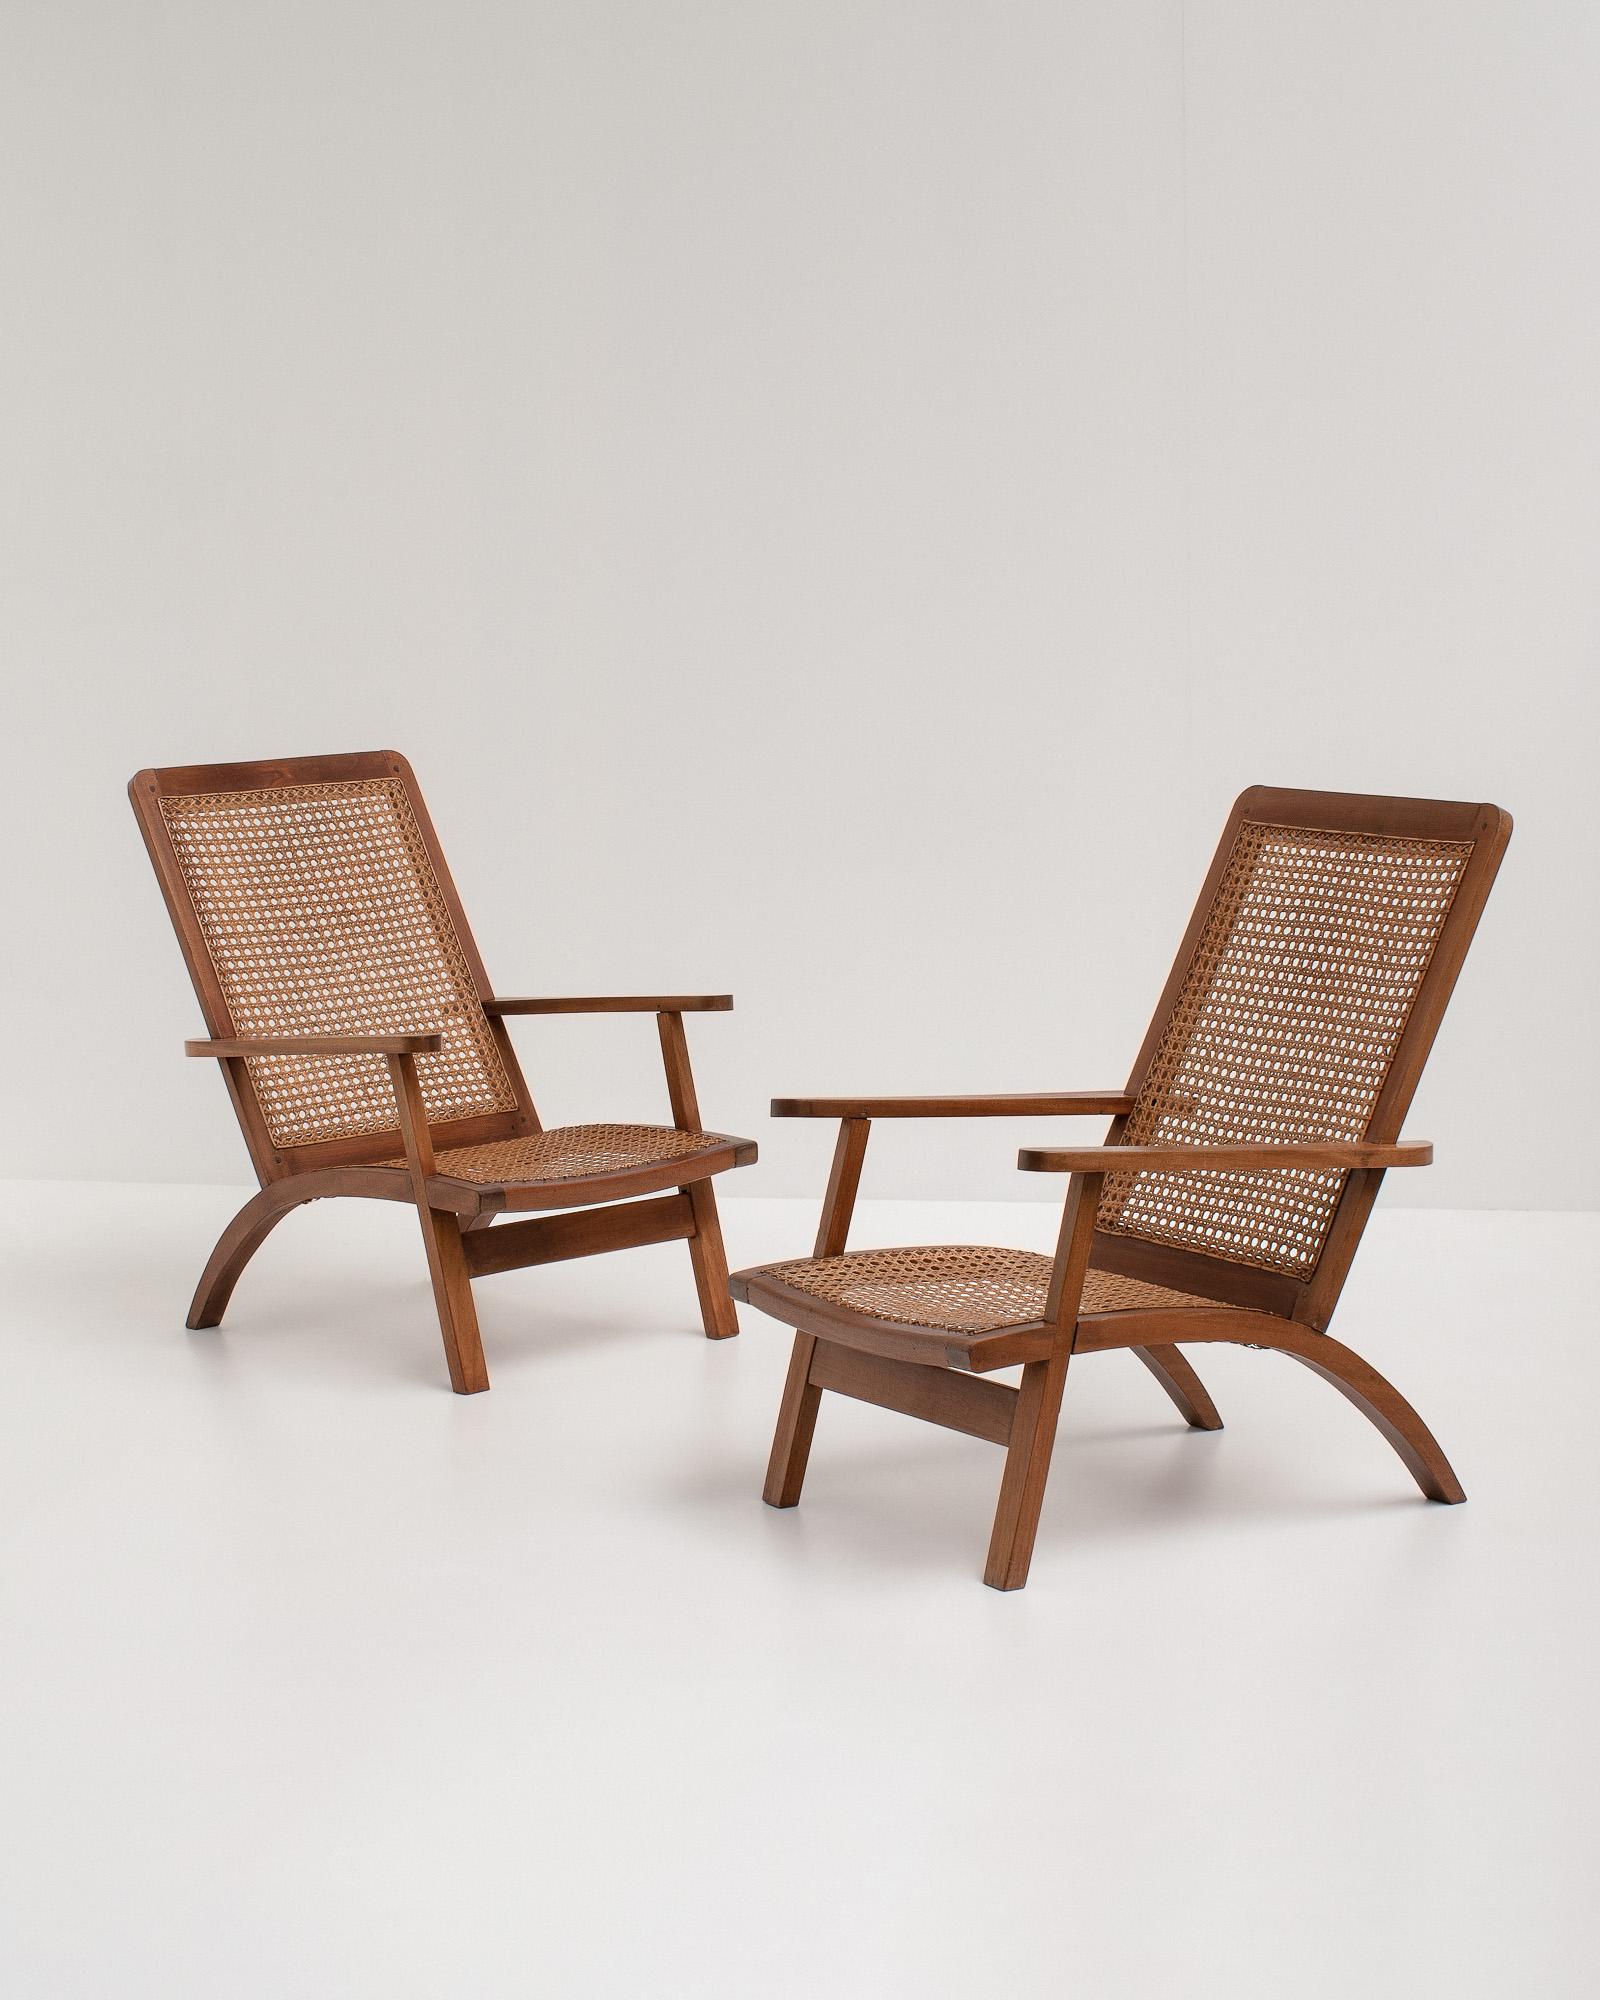 A pair of stunning mid-century sculptural French armchairs in mahogany with caned seating and back, France, 1950s. 
The seat and backs are made of cane and the simple detailing and craftsmanship elevate the design of these chairs. 

They have a